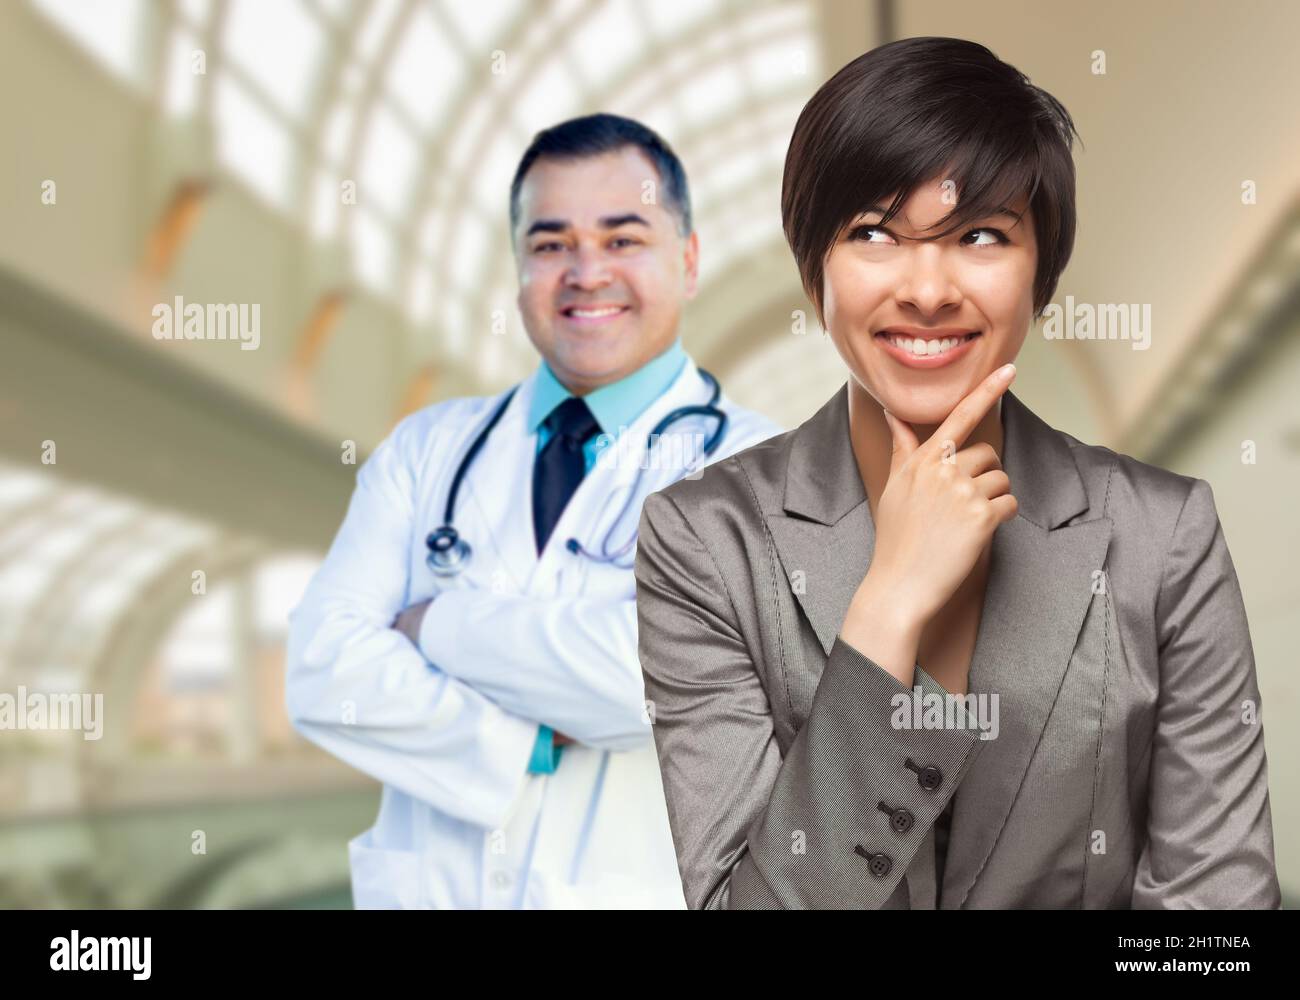 Happy Mixed Race Woman Looking To The Side As Hispanic Male Doctor Stands Behind Her Inside Hospital. Stock Photo